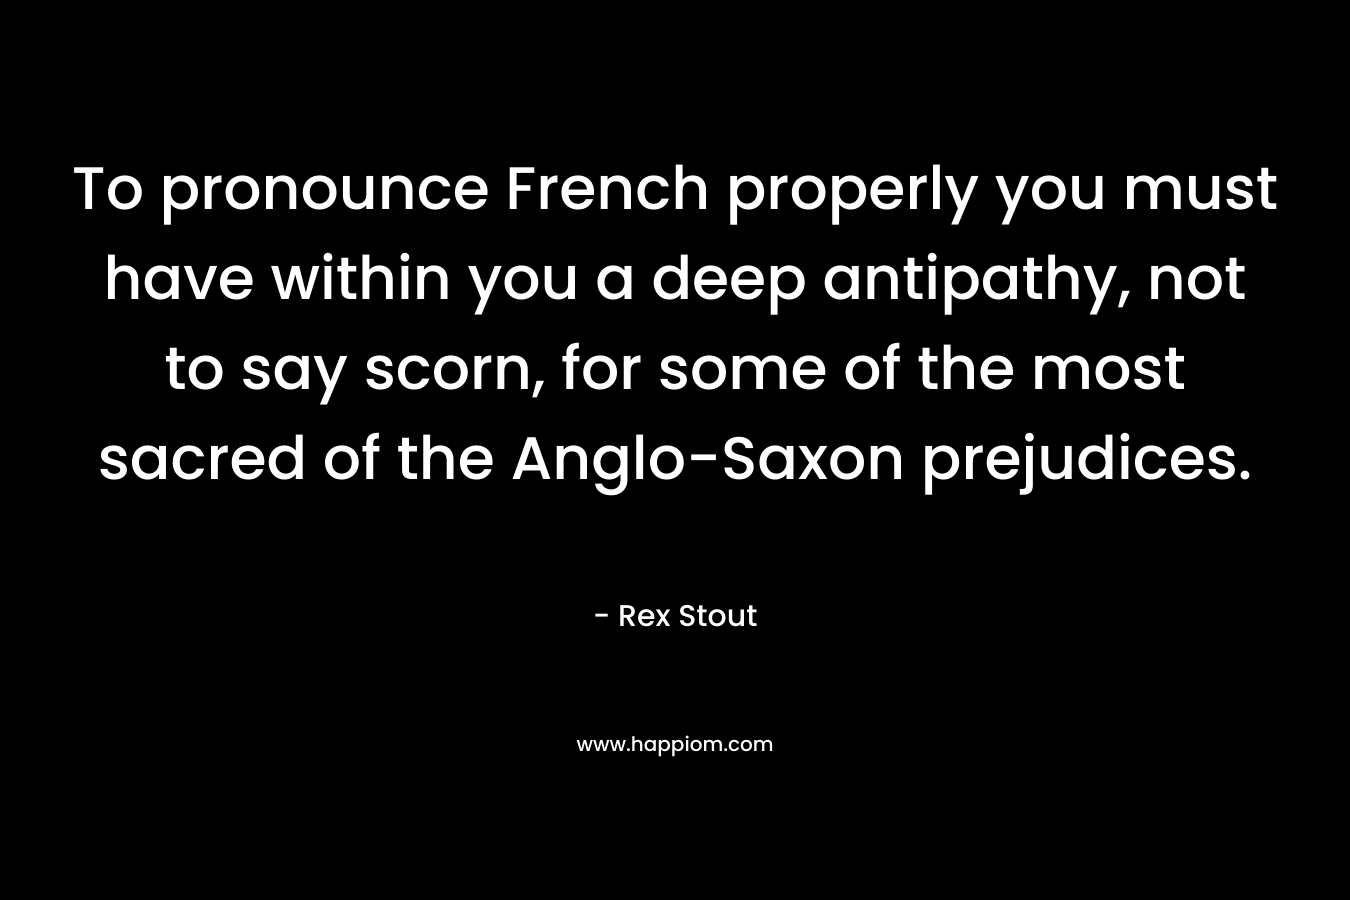 To pronounce French properly you must have within you a deep antipathy, not to say scorn, for some of the most sacred of the Anglo-Saxon prejudices.